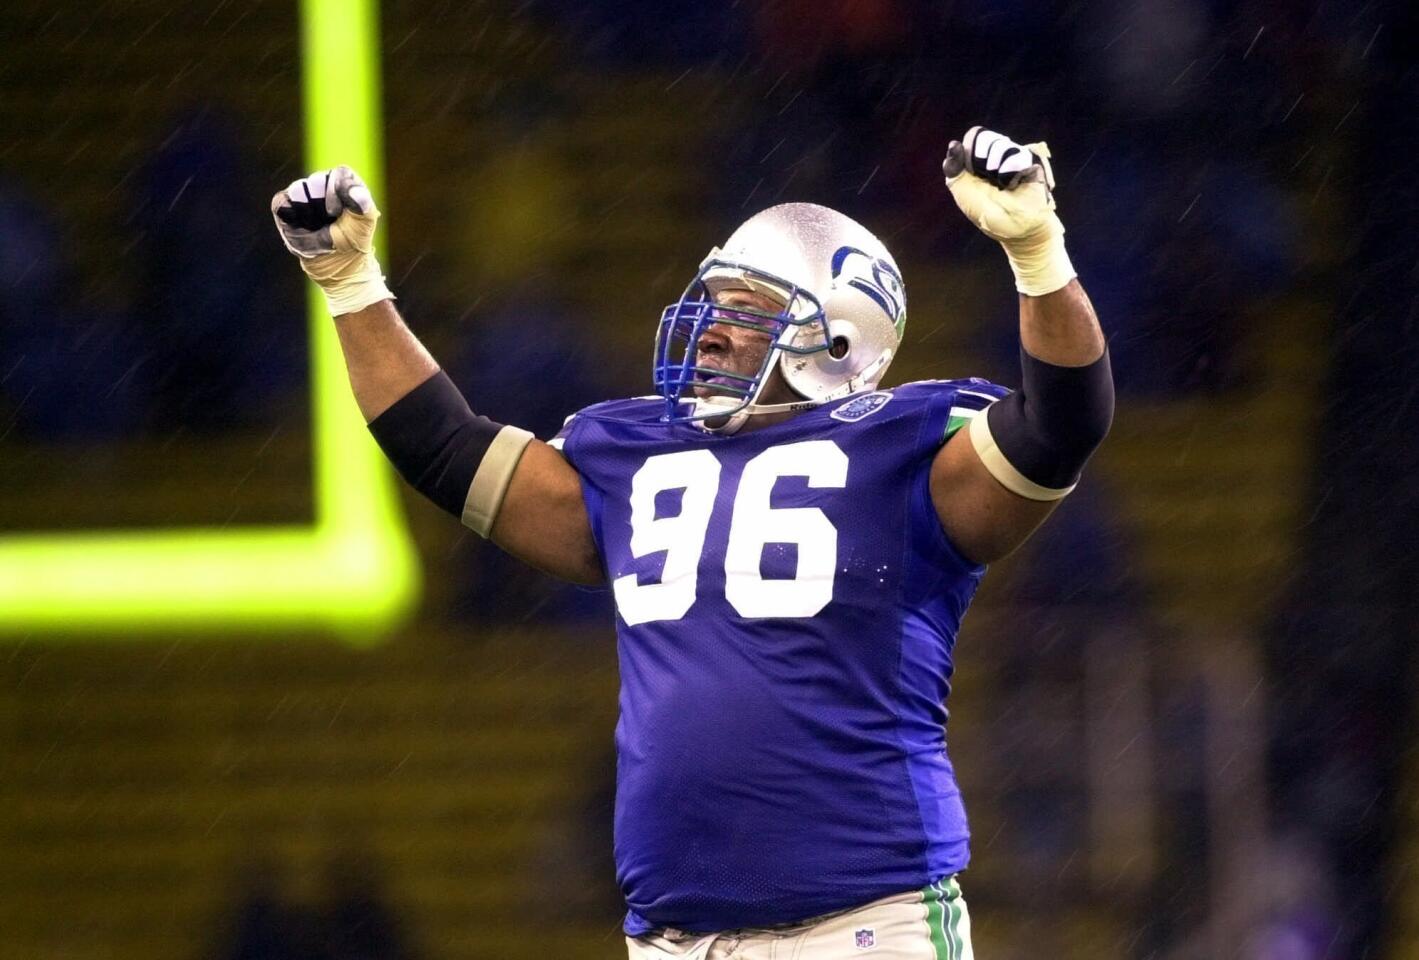 Pro Football Hall of Fame defensive lineman Cortez Kennedy, who spent his entire NFL career with the Seattle Seahawks, died on May 23, 2017, in Orlando, Fla. He was 48. Read more.